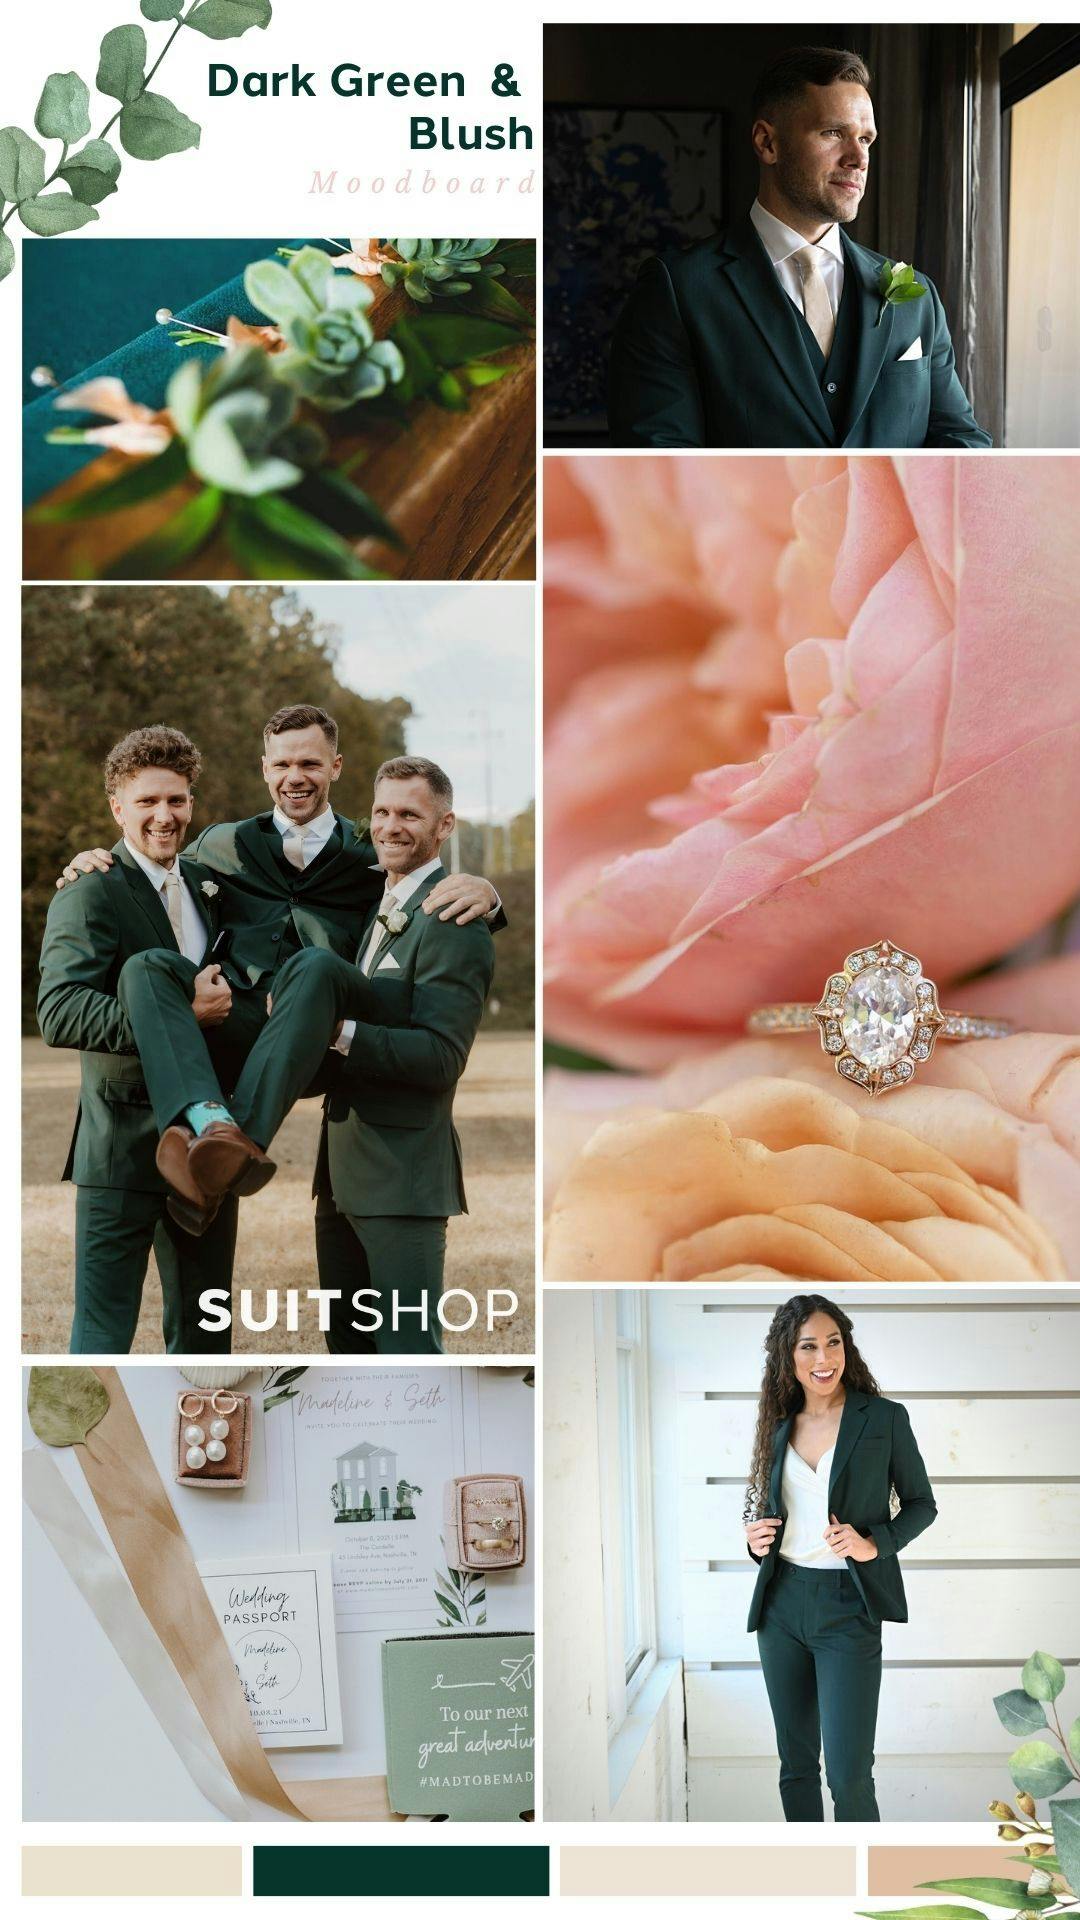 Wedding planning inspo collage with engagement ring, wedding invitations, women's suits, and groomsman outfit in dark green and blush.